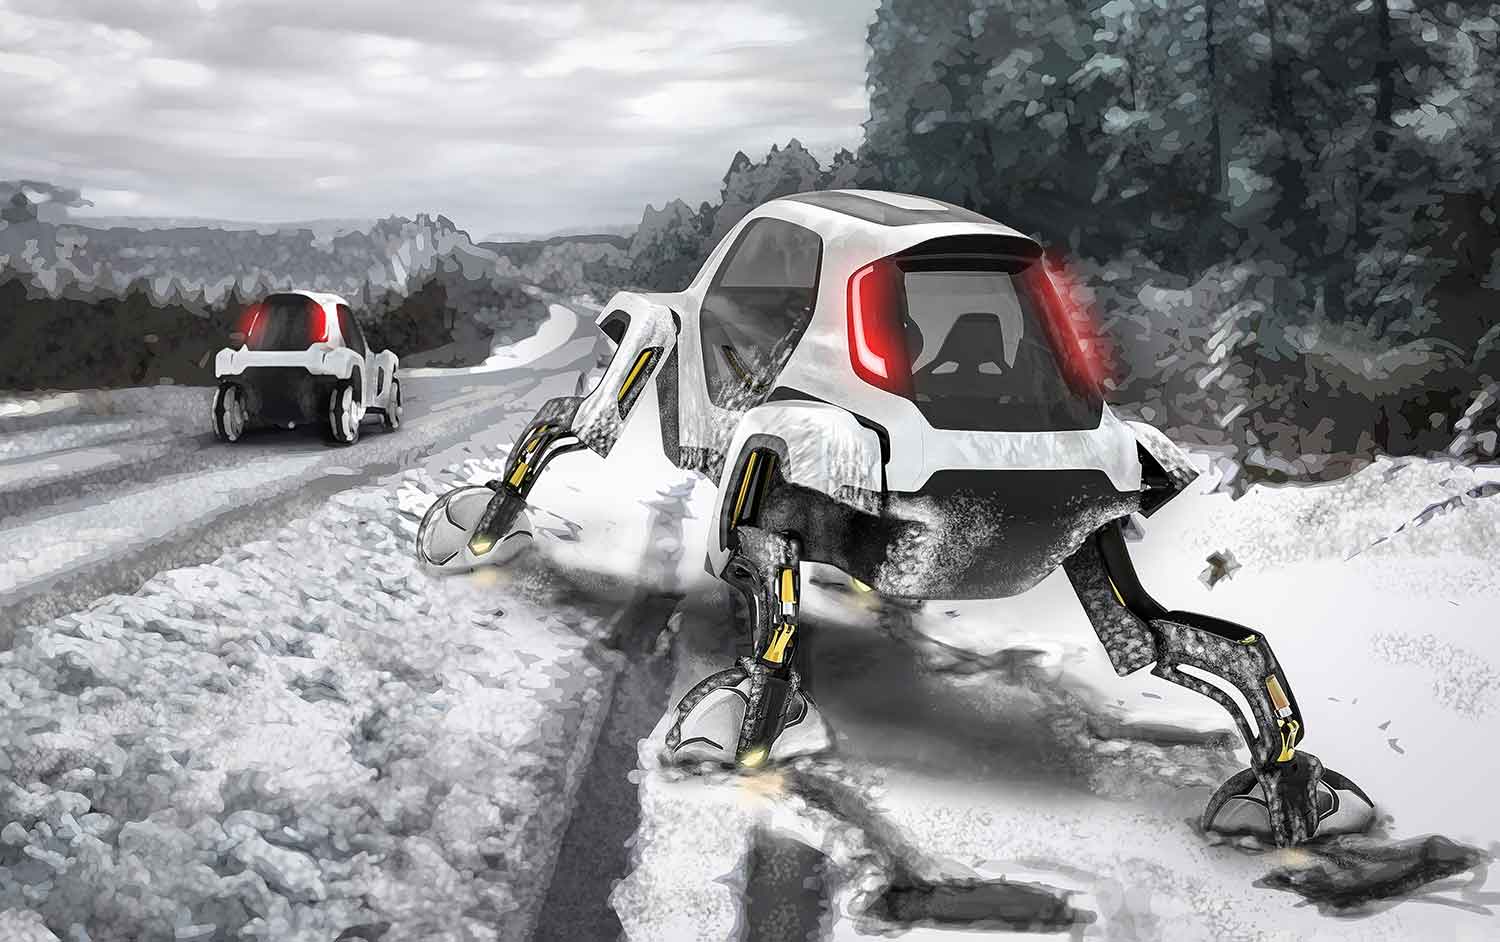 A car uses robotic legs to get over a snowbank onto a road while an identical car drives on that road.